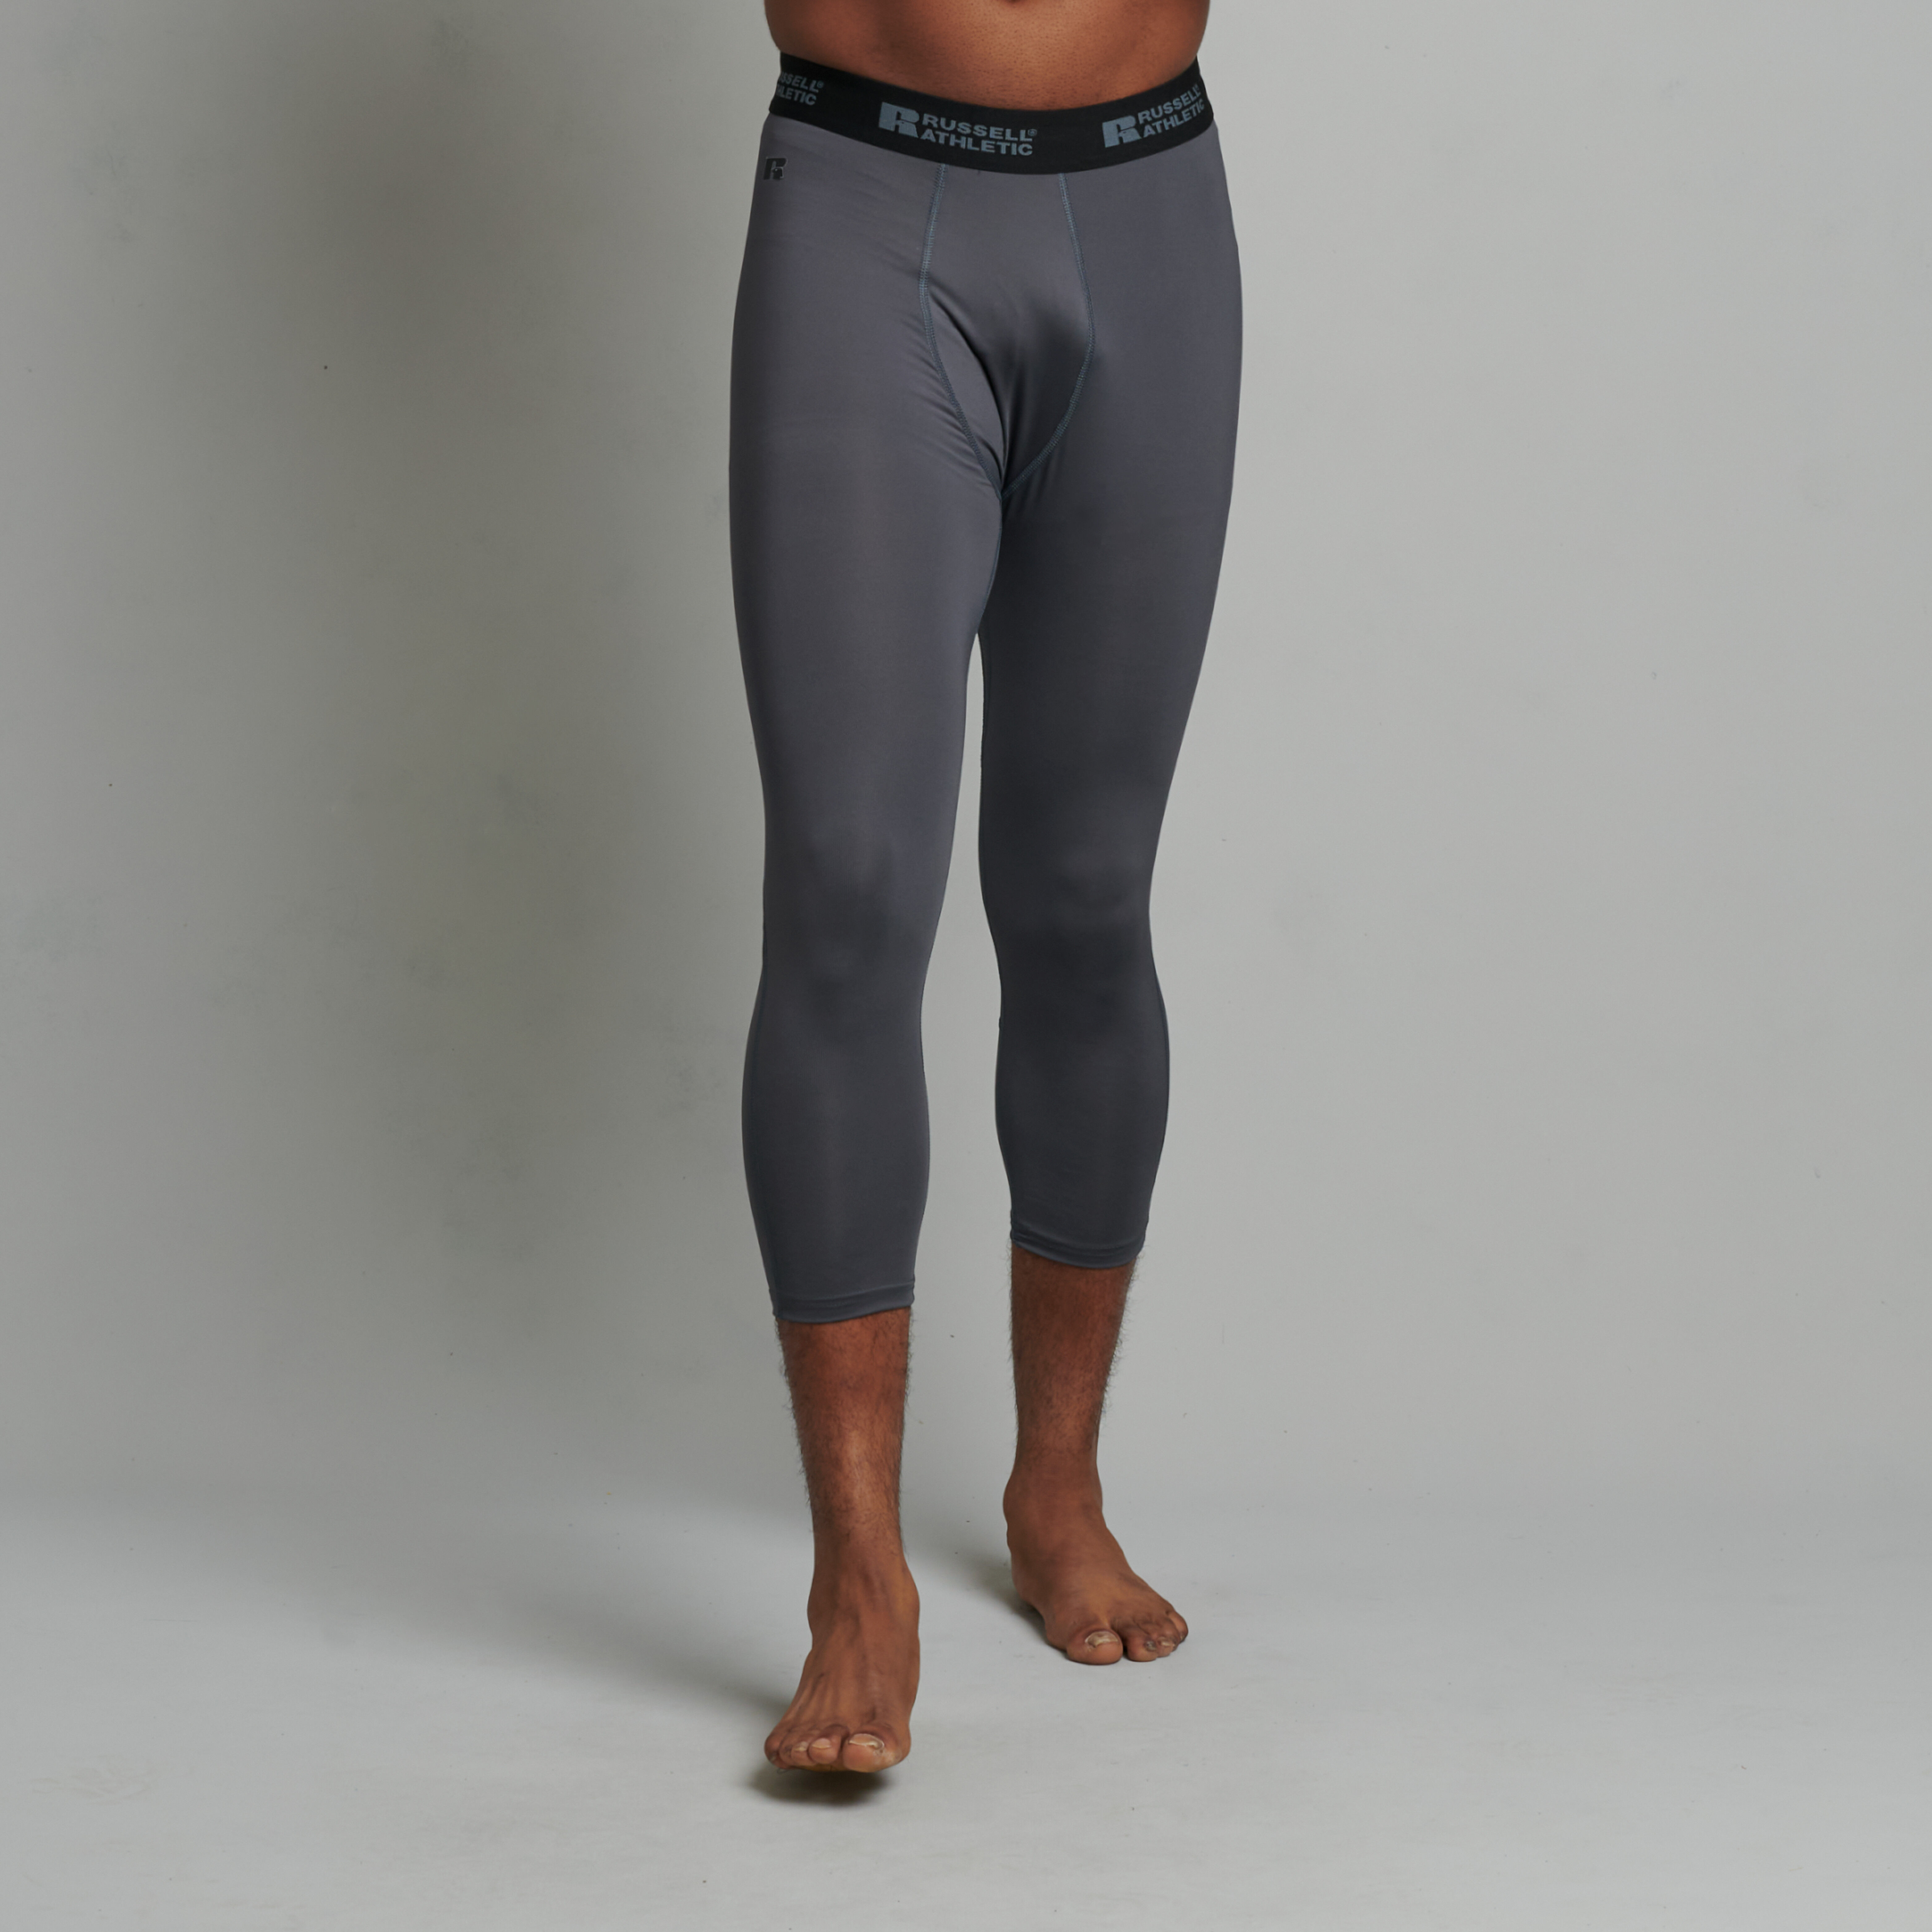 The Best Men's Compression Shorts for Running 2023